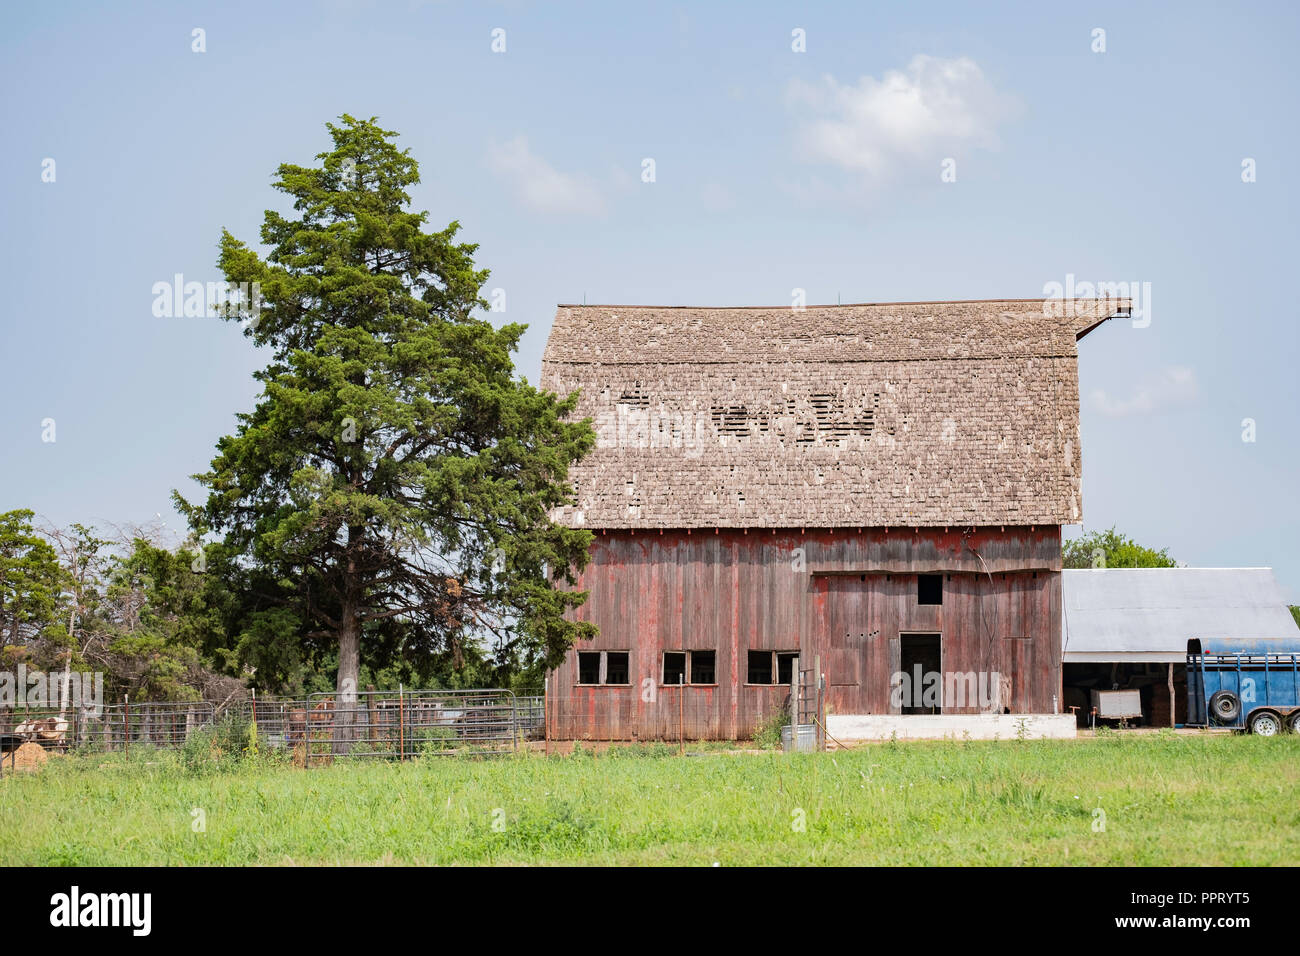 Old faded red wooden barn in the countryside outside of Wichita, Kansas, USA. Stock Photo